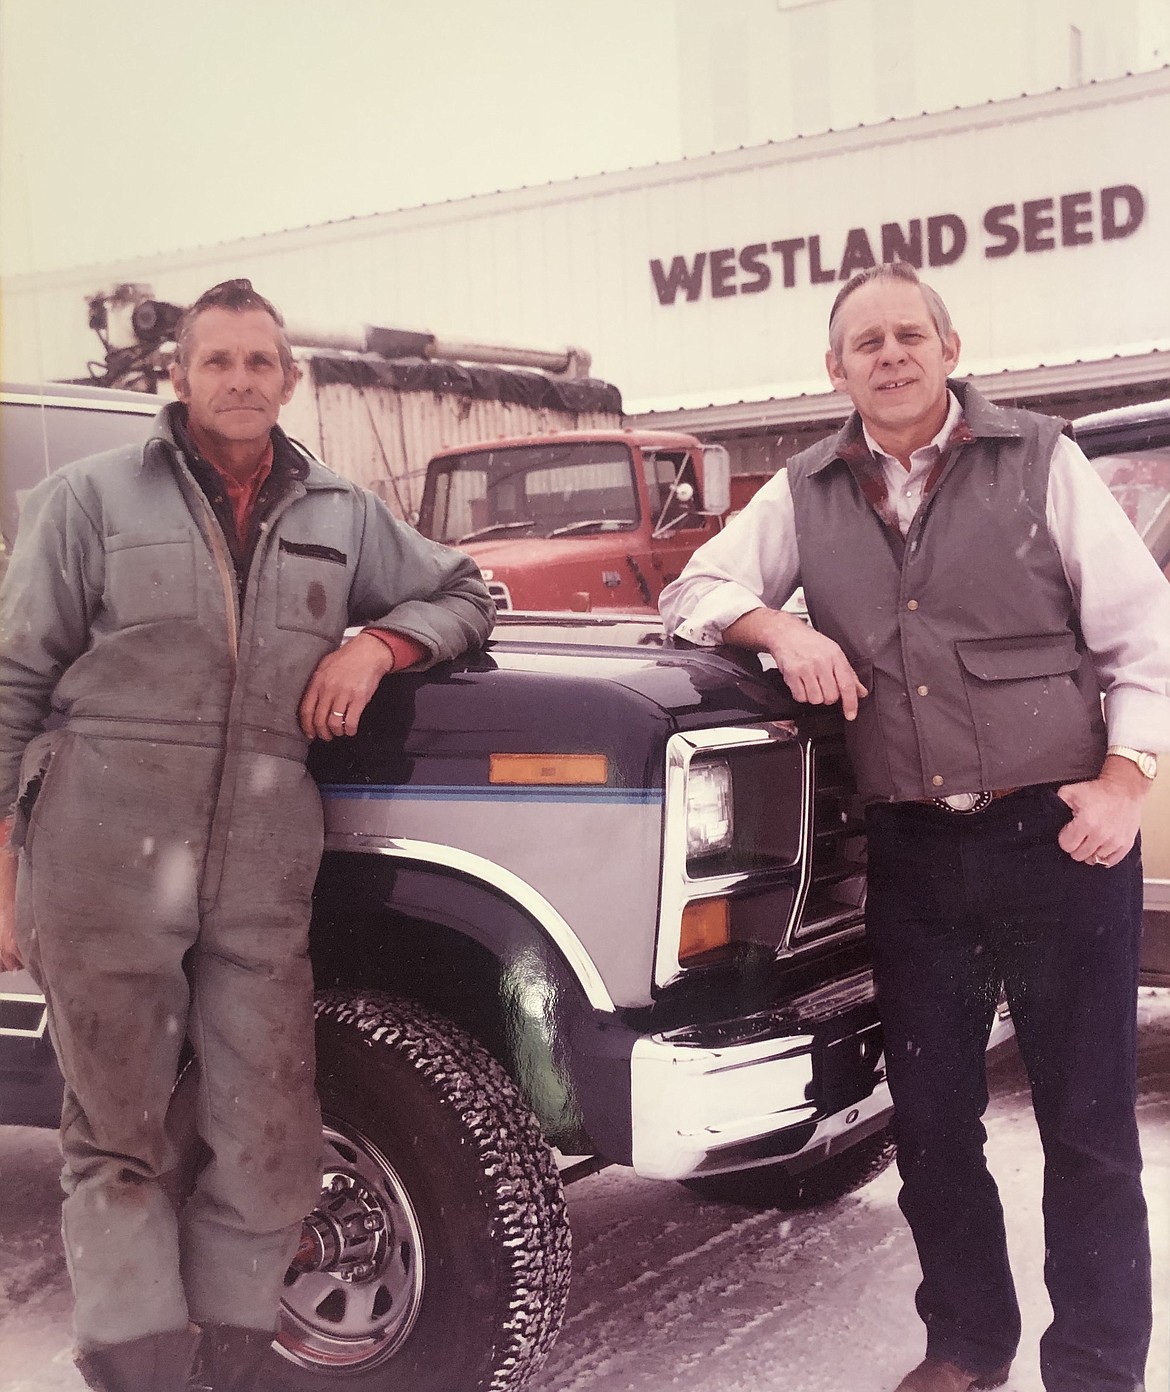 Brothers Jerry and Ken Sagmiller pose in front of the then-new Westland Seed Building in Ronan.